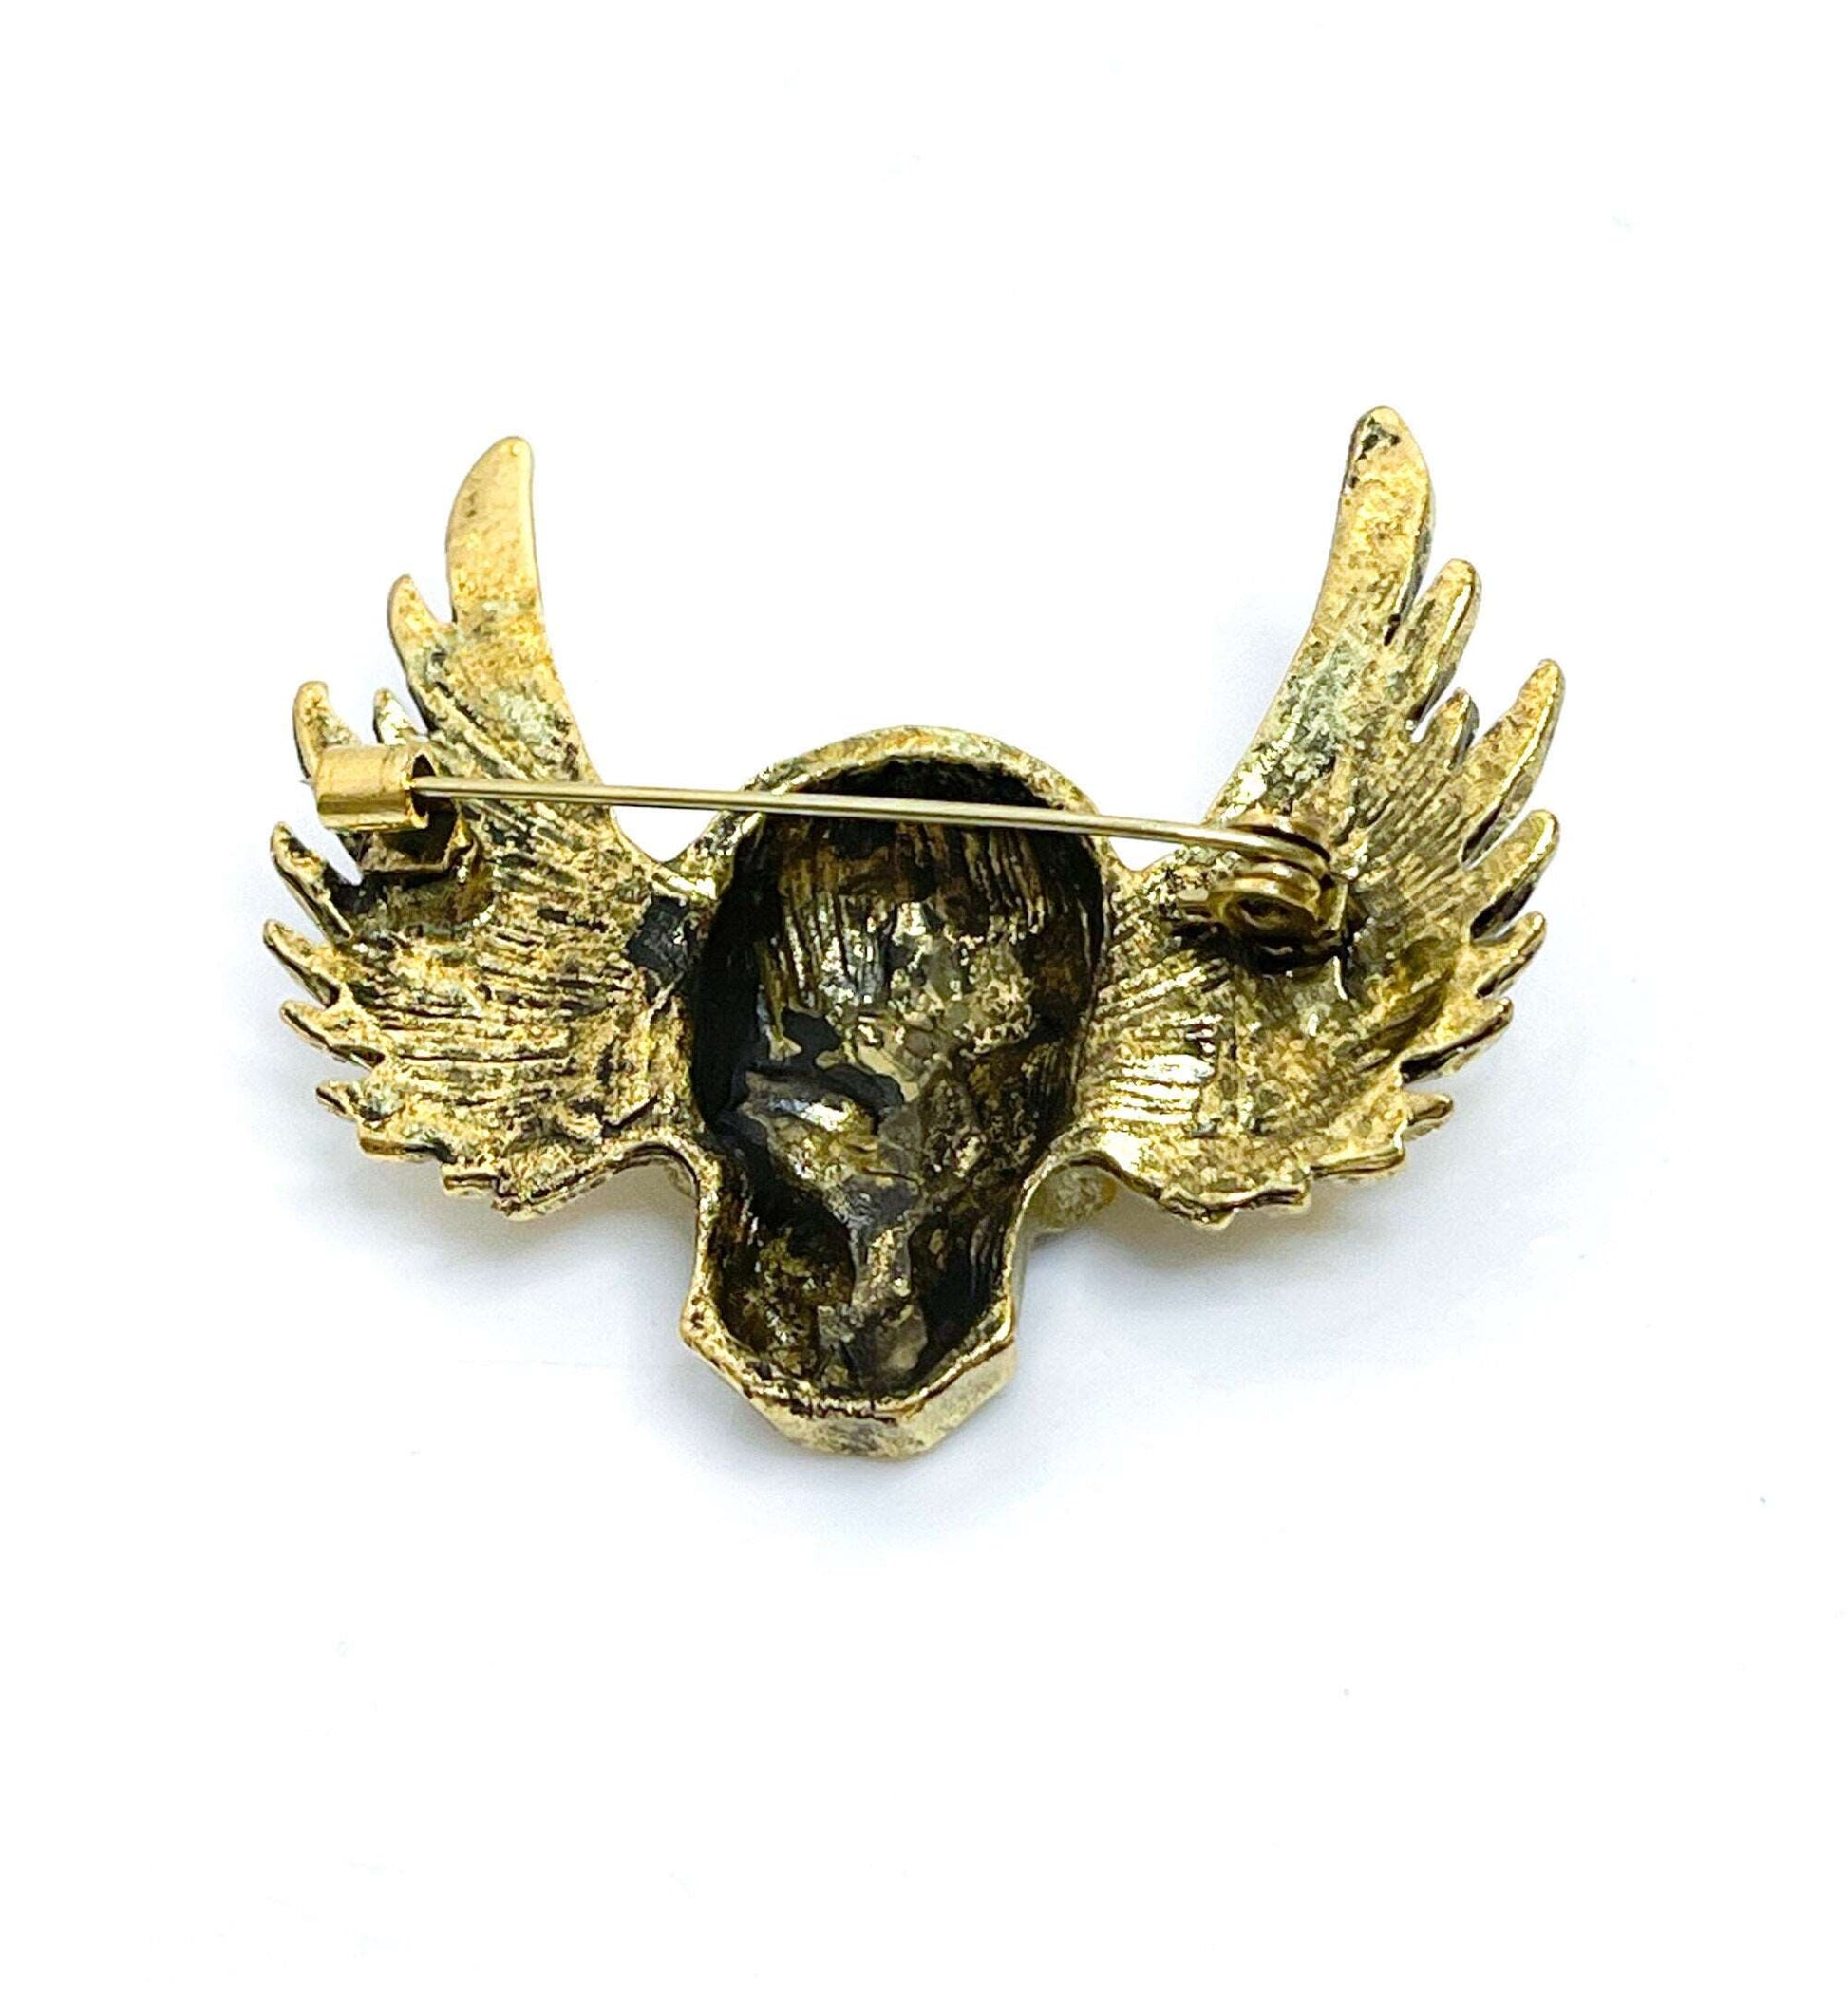 Antique Gold Winged Skull Brooch | Unisex Gothic Brooch | Bikers Pin